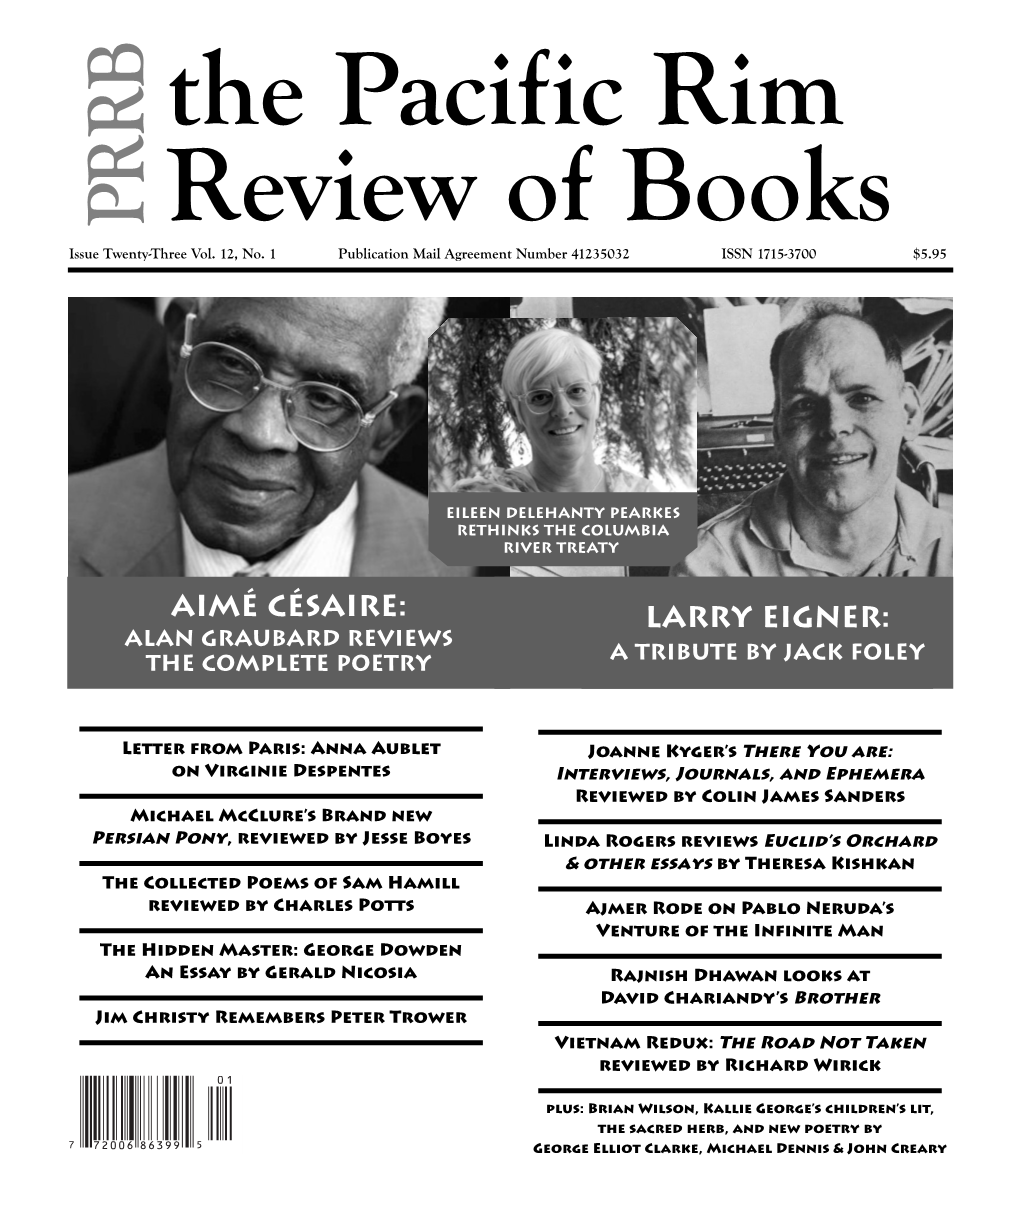 Prrbpacific Rim Review of Books Remembering Peter Trower Essay by Jim Christy Page 11 Issue Twenty-Three Vol